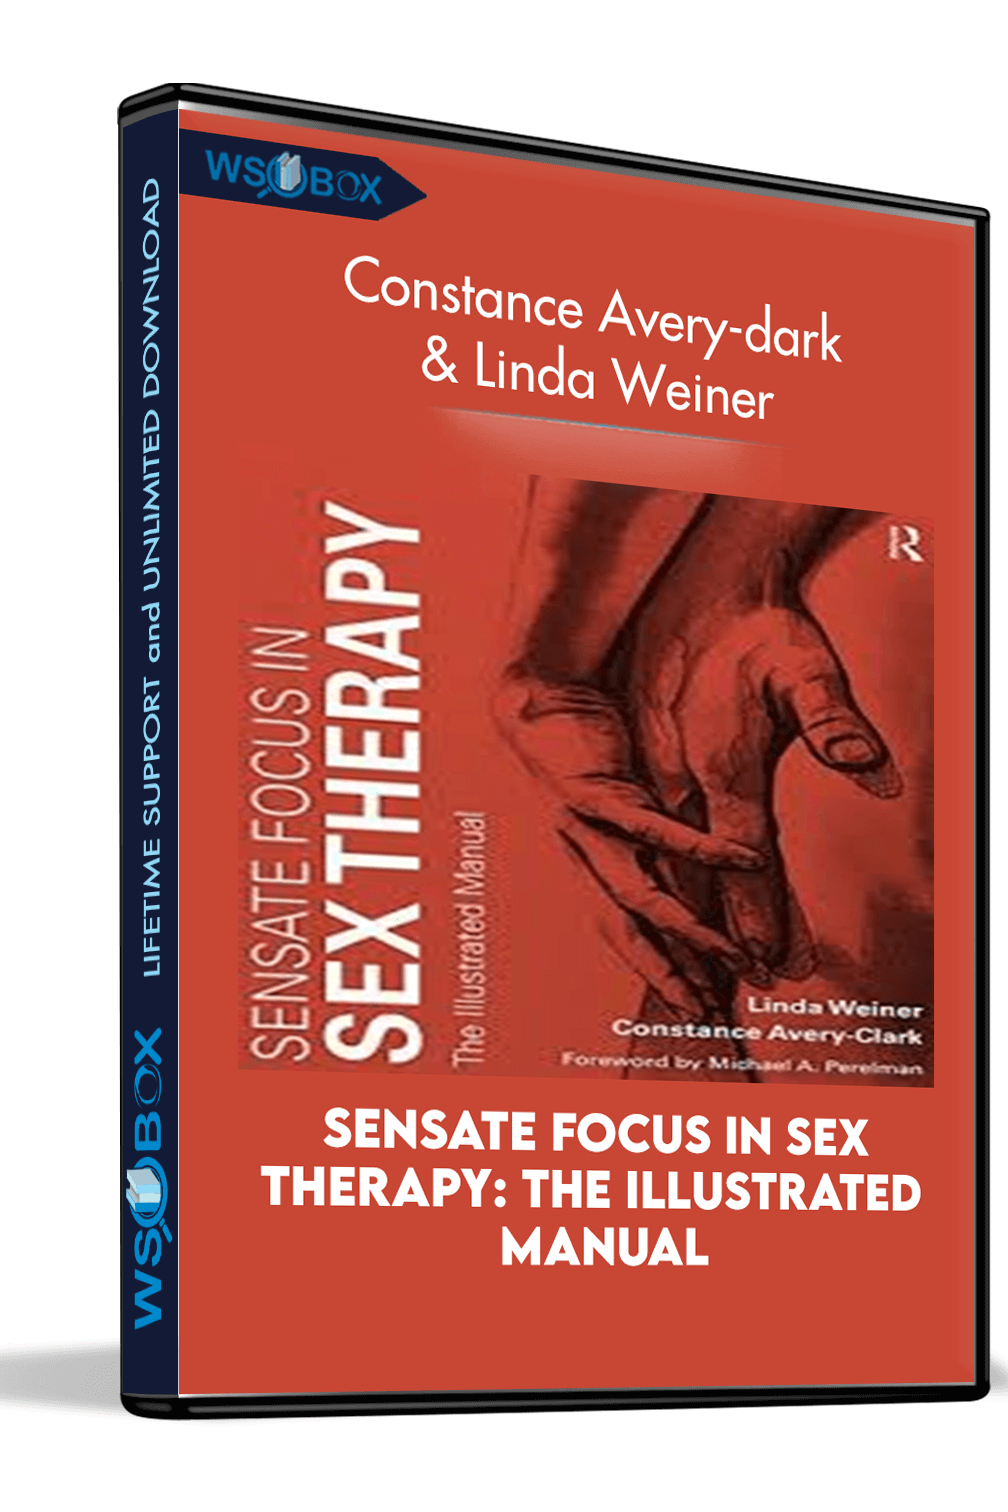 sensate-focus-in-sex-therapy-the-illustrated-manual-constance-avery-dark-linda-weiner